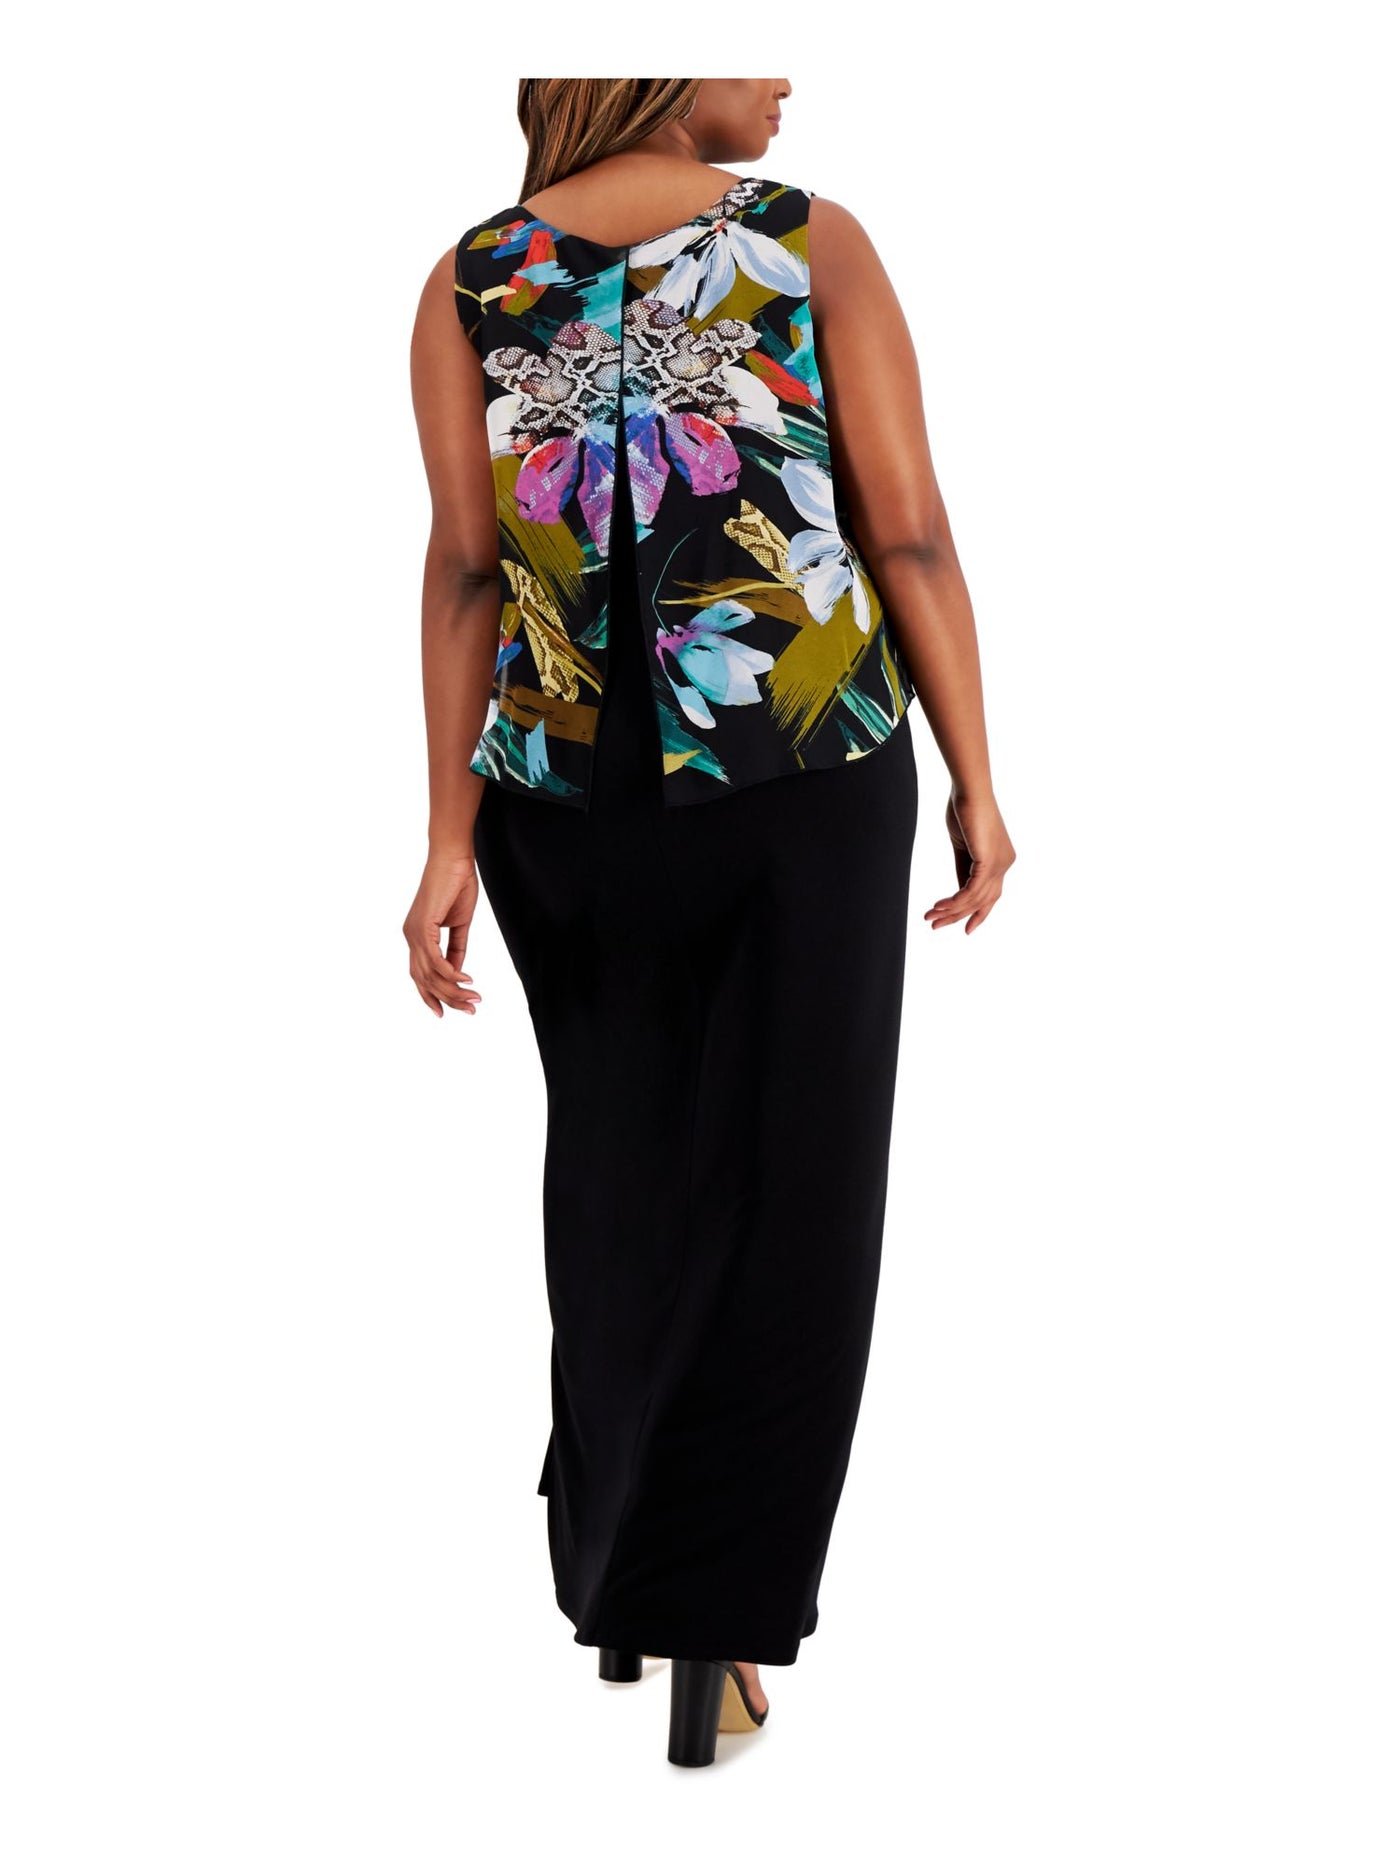 CONNECTED APPAREL Womens Black Stretch Printed Sleeveless Scoop Neck Maxi Evening Dress Plus 20W